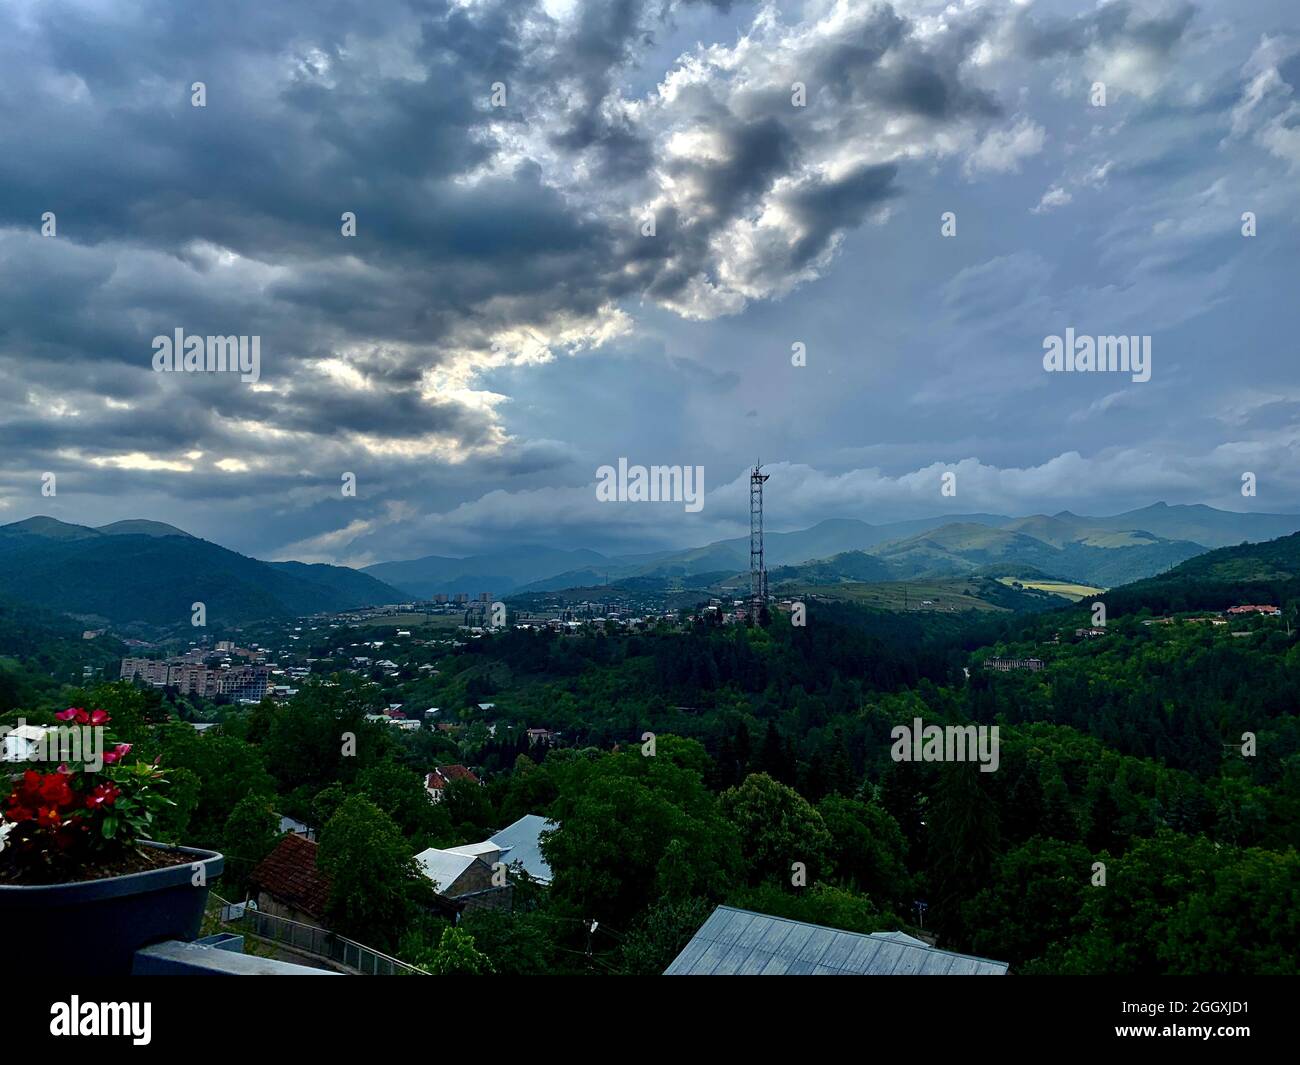 Cityscape and nature of Dilijan from a terrace on a cloudy day in Armenia Stock Photo